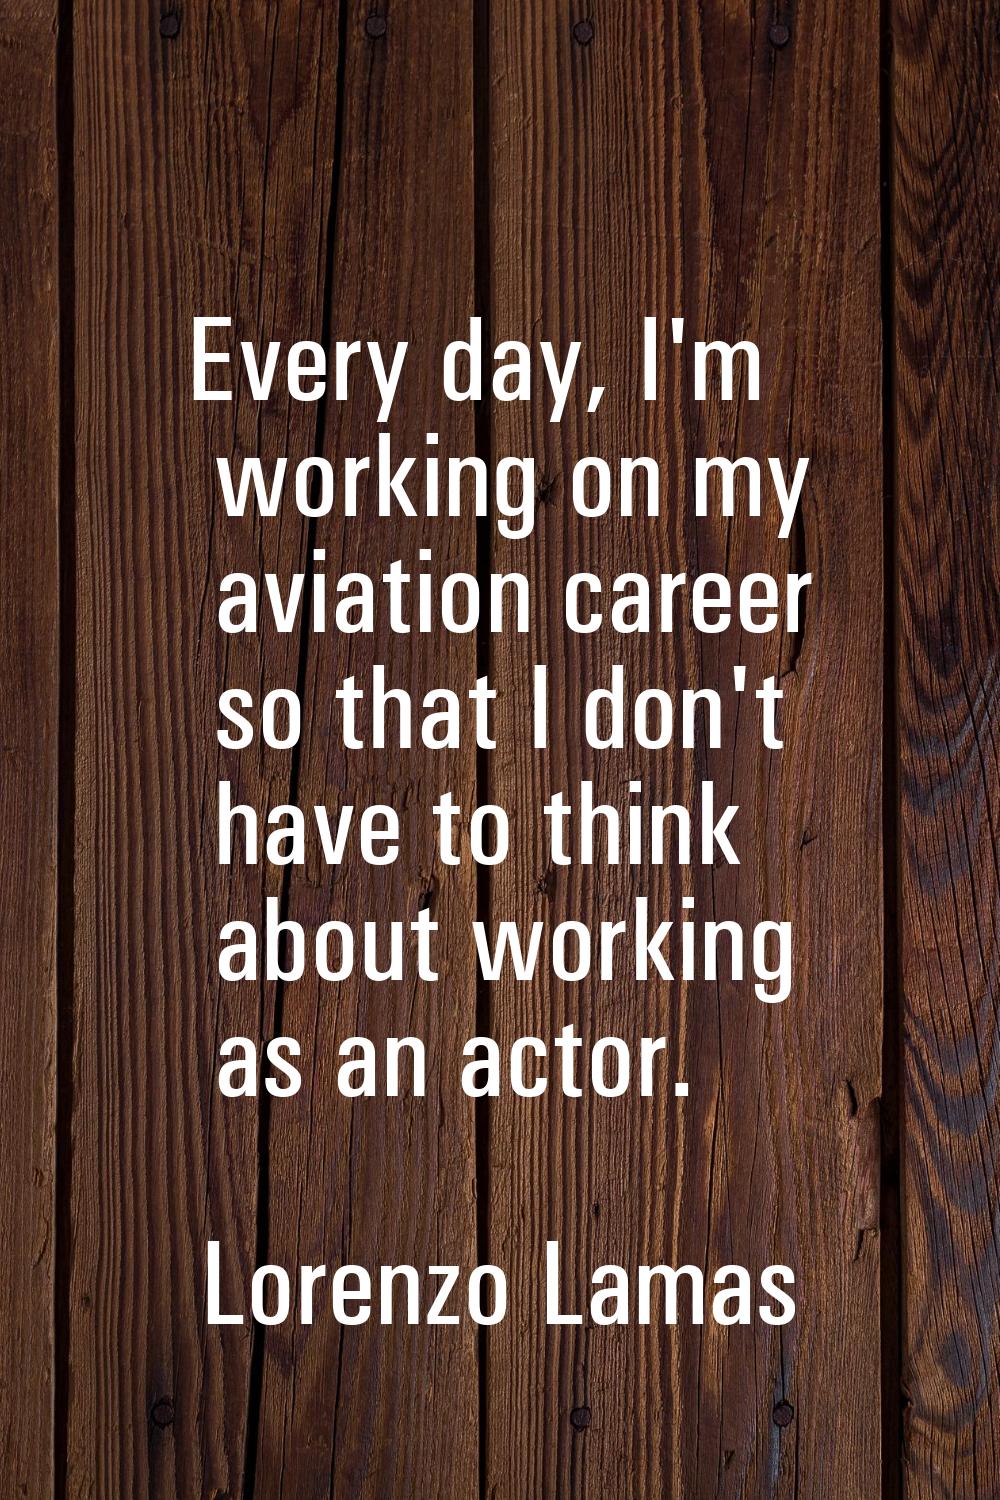 Every day, I'm working on my aviation career so that I don't have to think about working as an acto